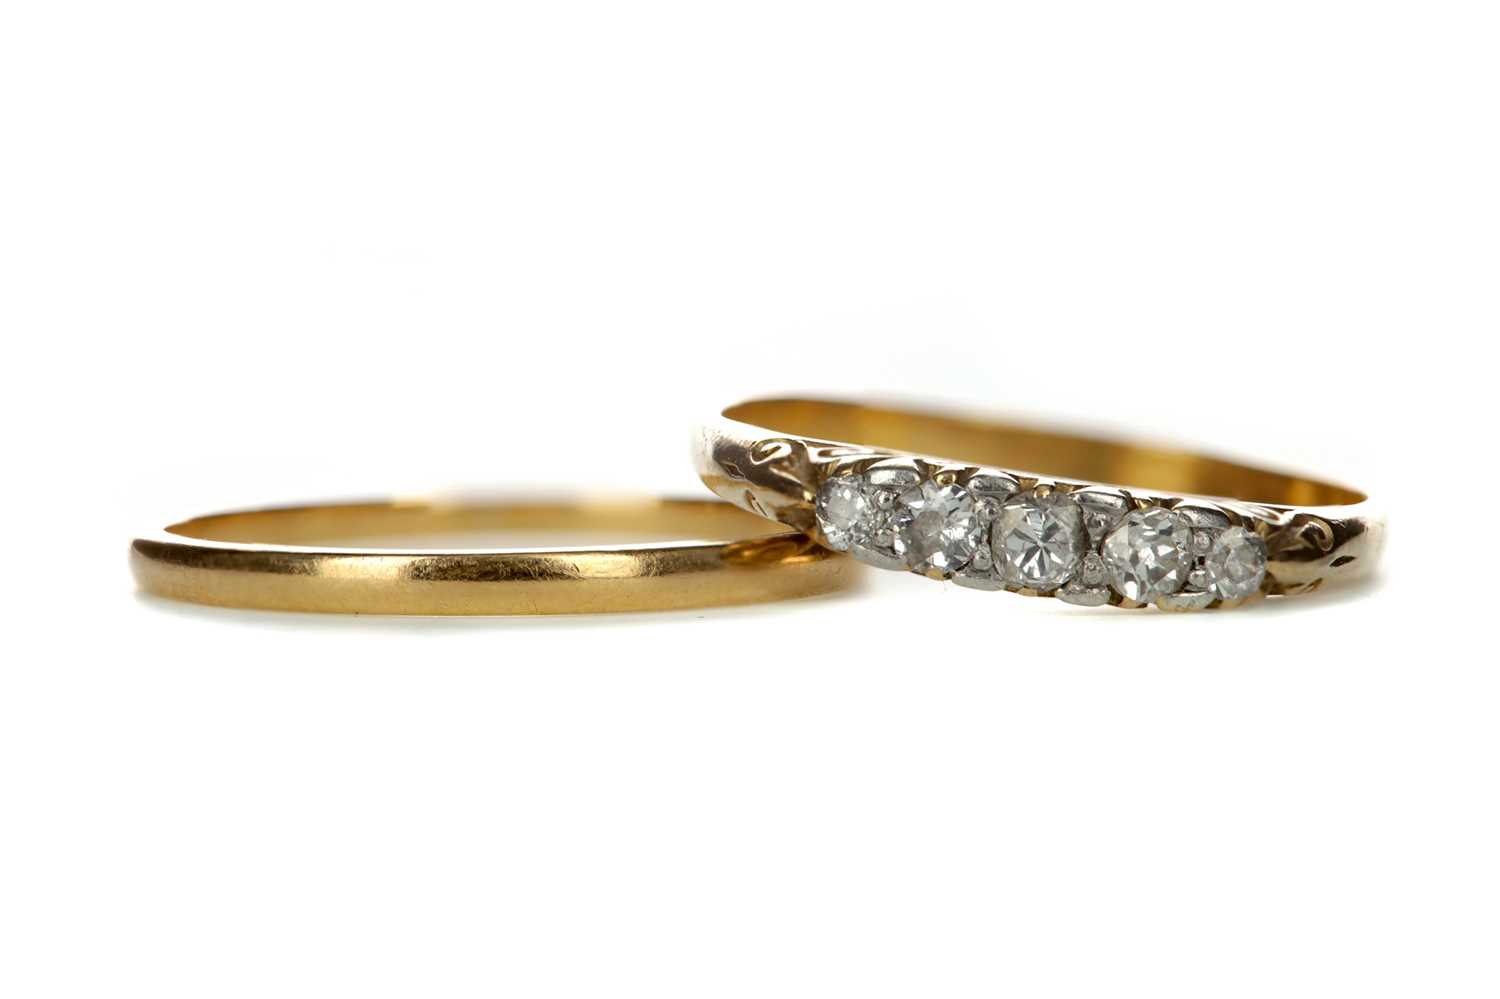 Lot 804 - A DIAMOND FIVE STONE RING AND A WEDDING BAND